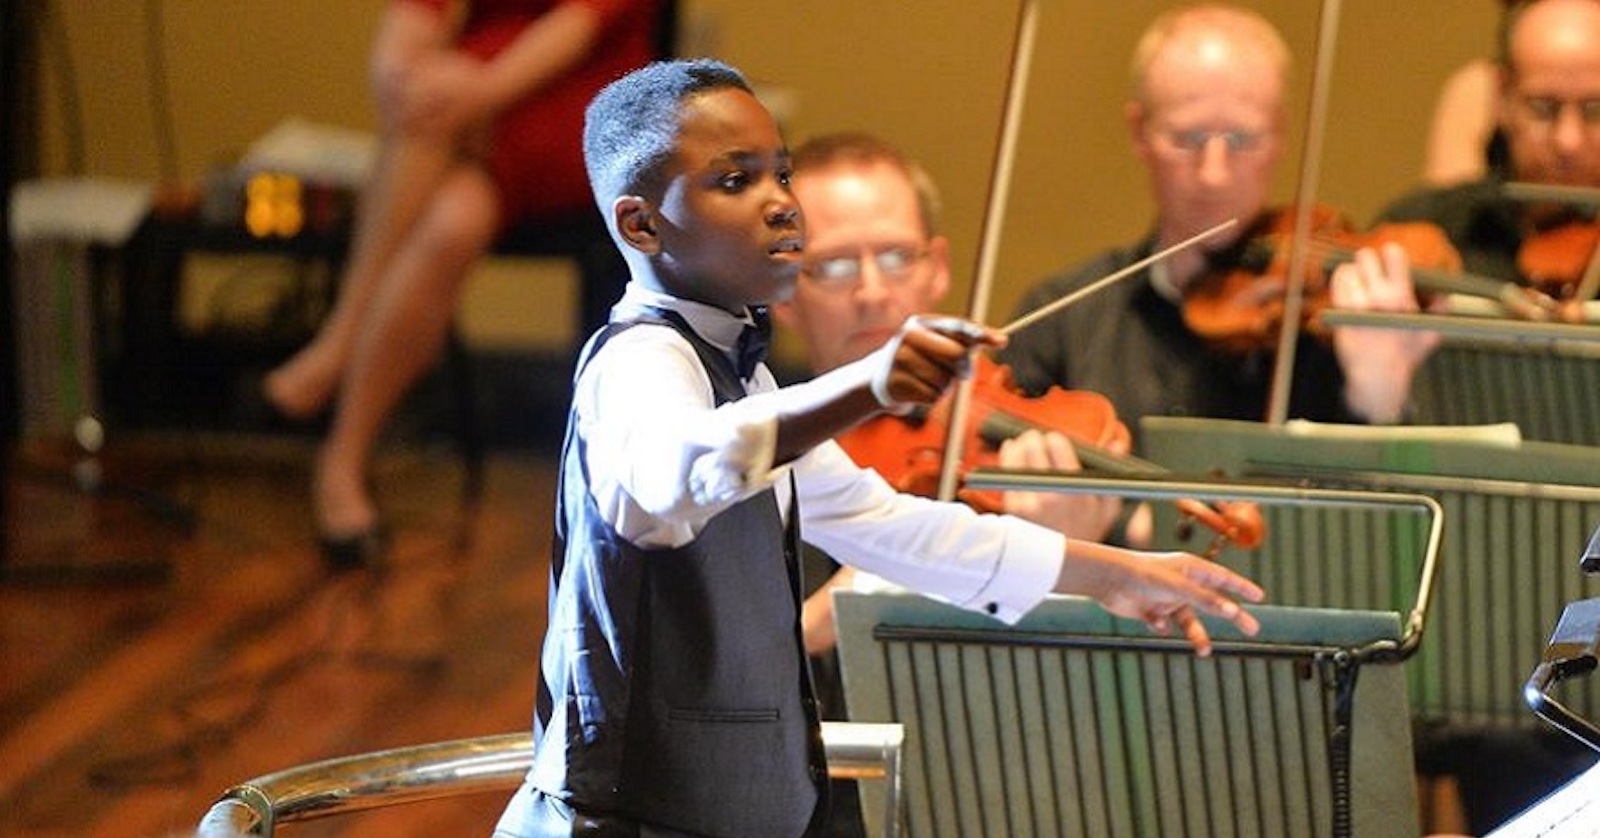 Meet the child genius who became world’s youngest orchestra conductor at 11 | Face2Face Africa